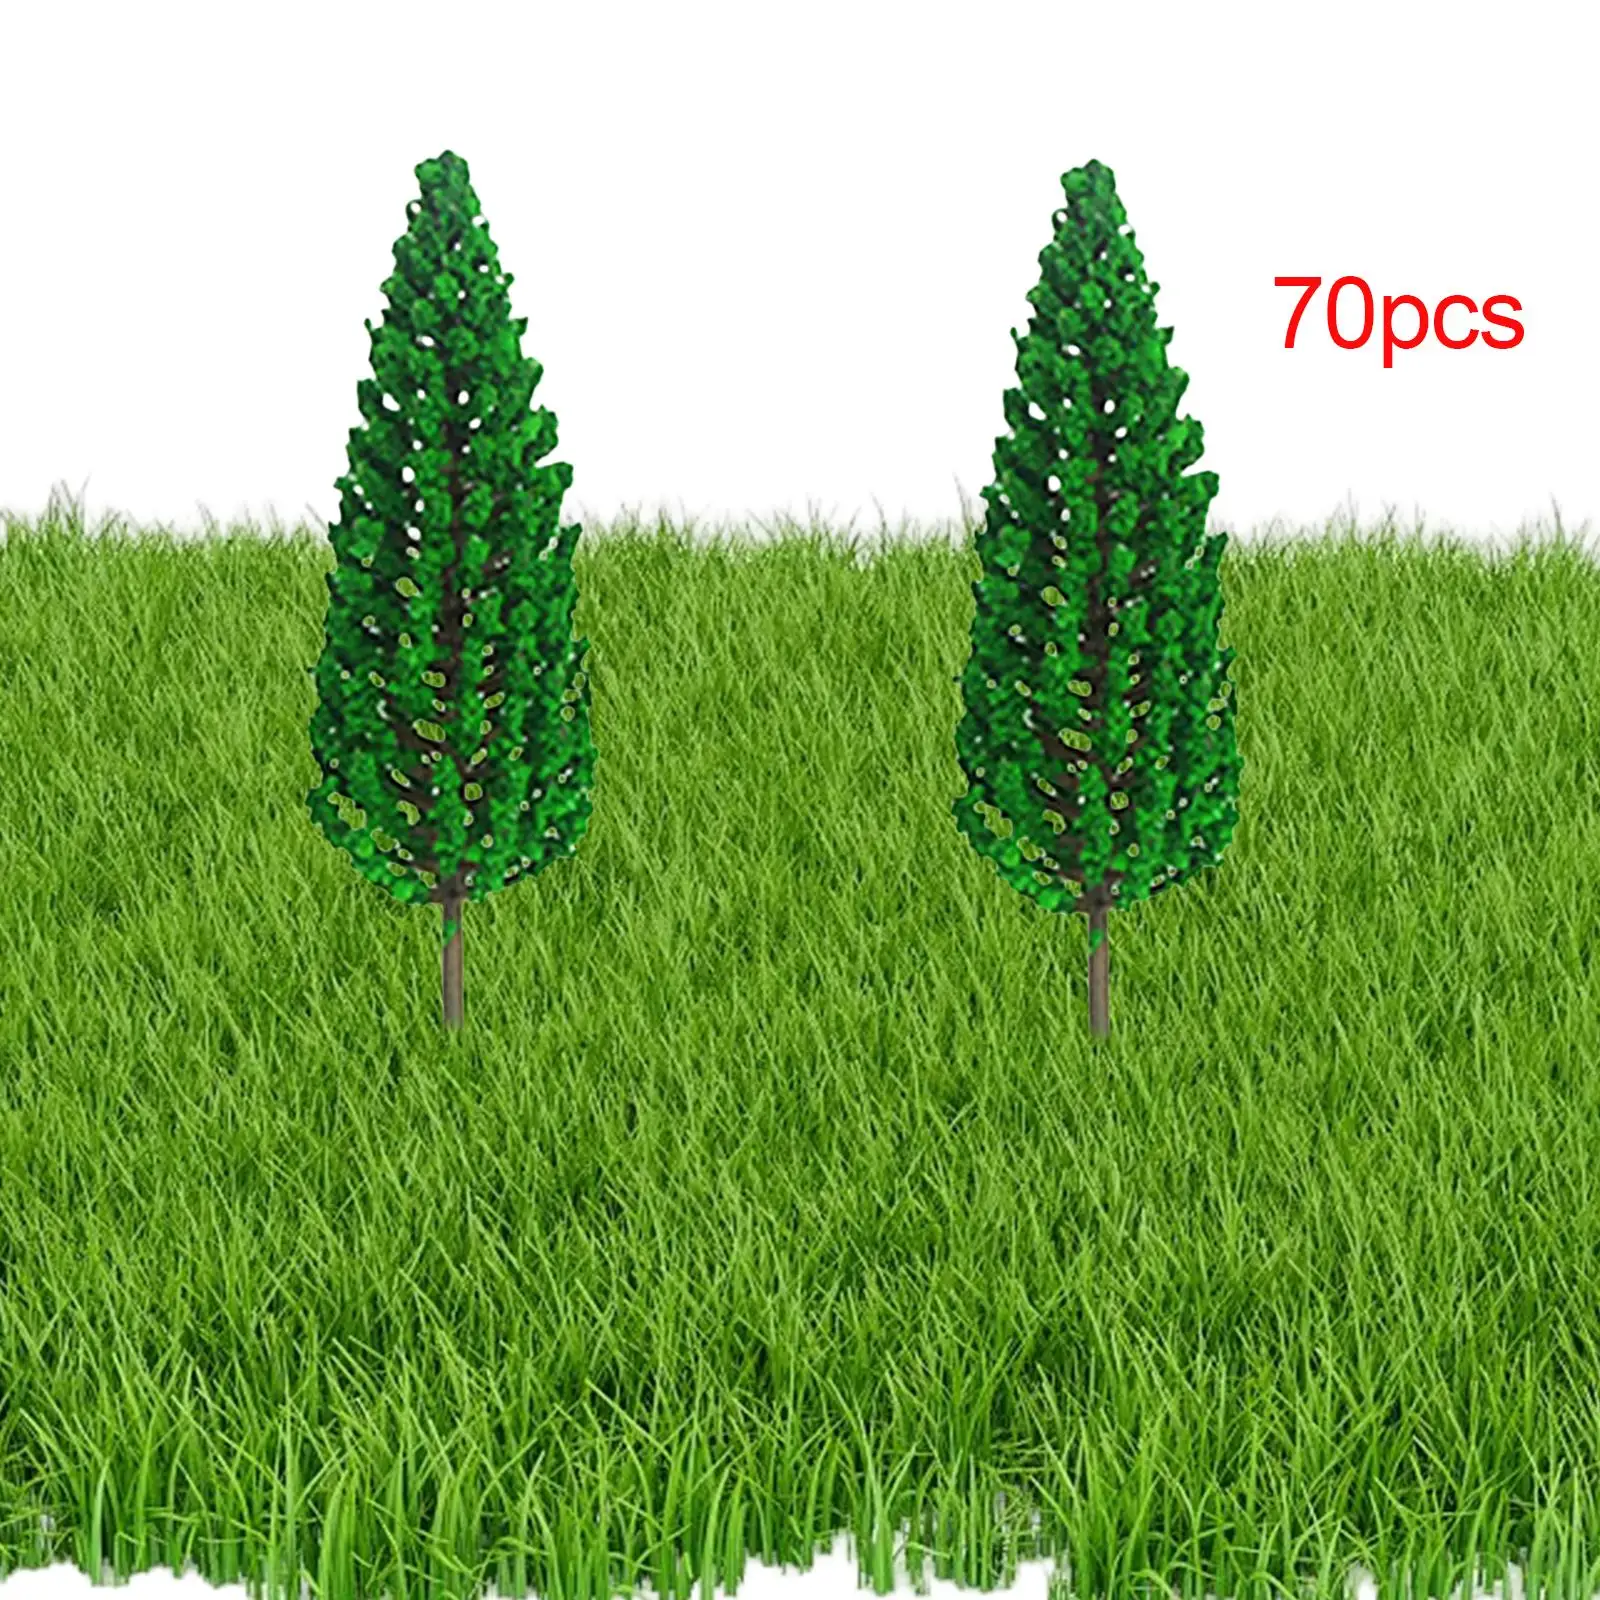 70 Pieces Miniature Landscape Trees 6cm Scenery Tree Model Trees Diorama Tree for Sand Table Railroad Scenery Accessories Layout